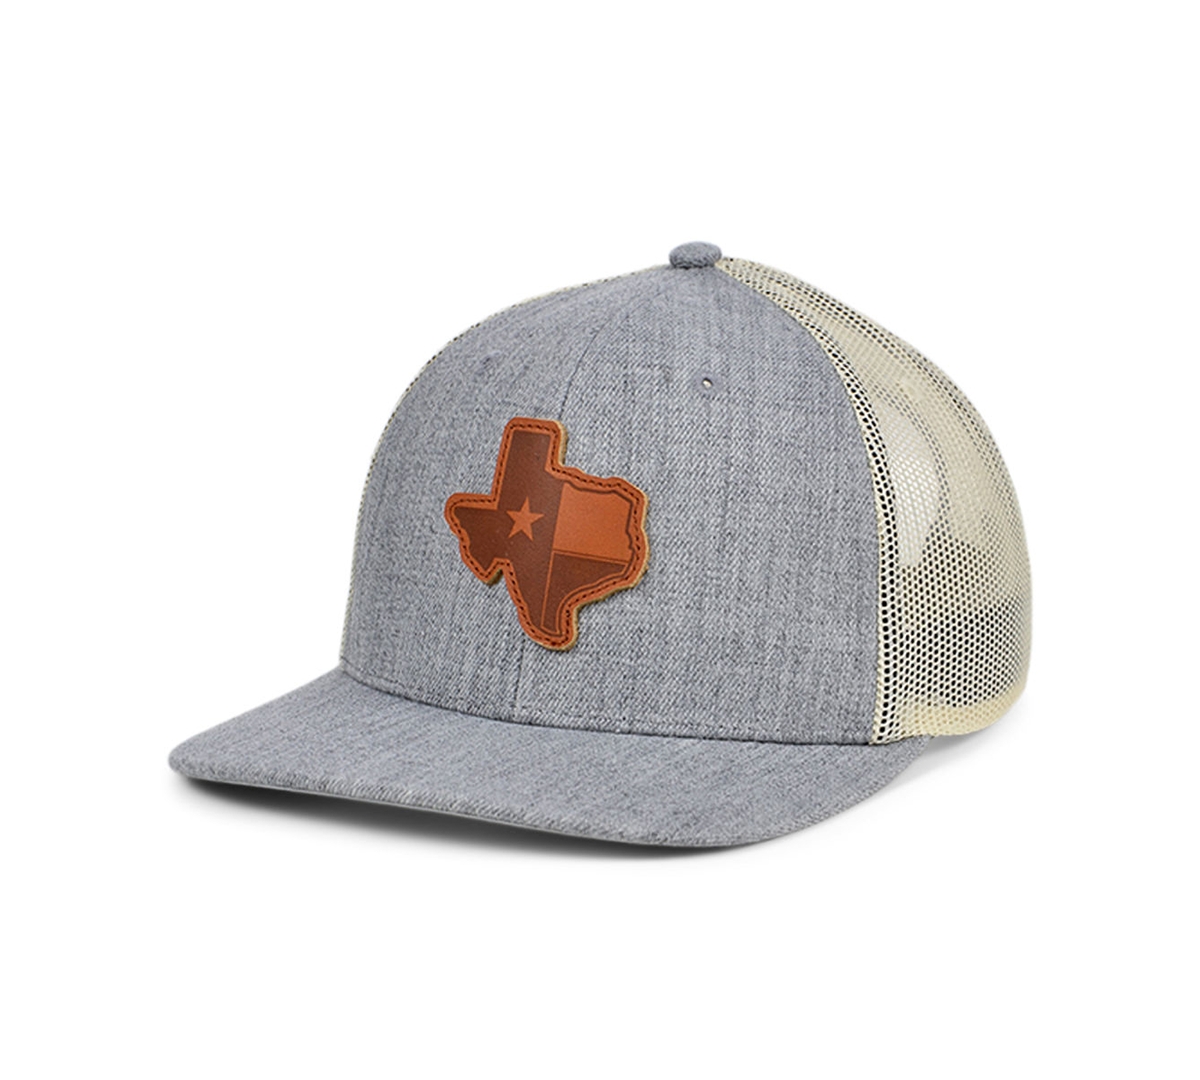 Local Crowns Texas Heather Leather State Patch Curved Trucker Cap - Heather Gray/White/Brown